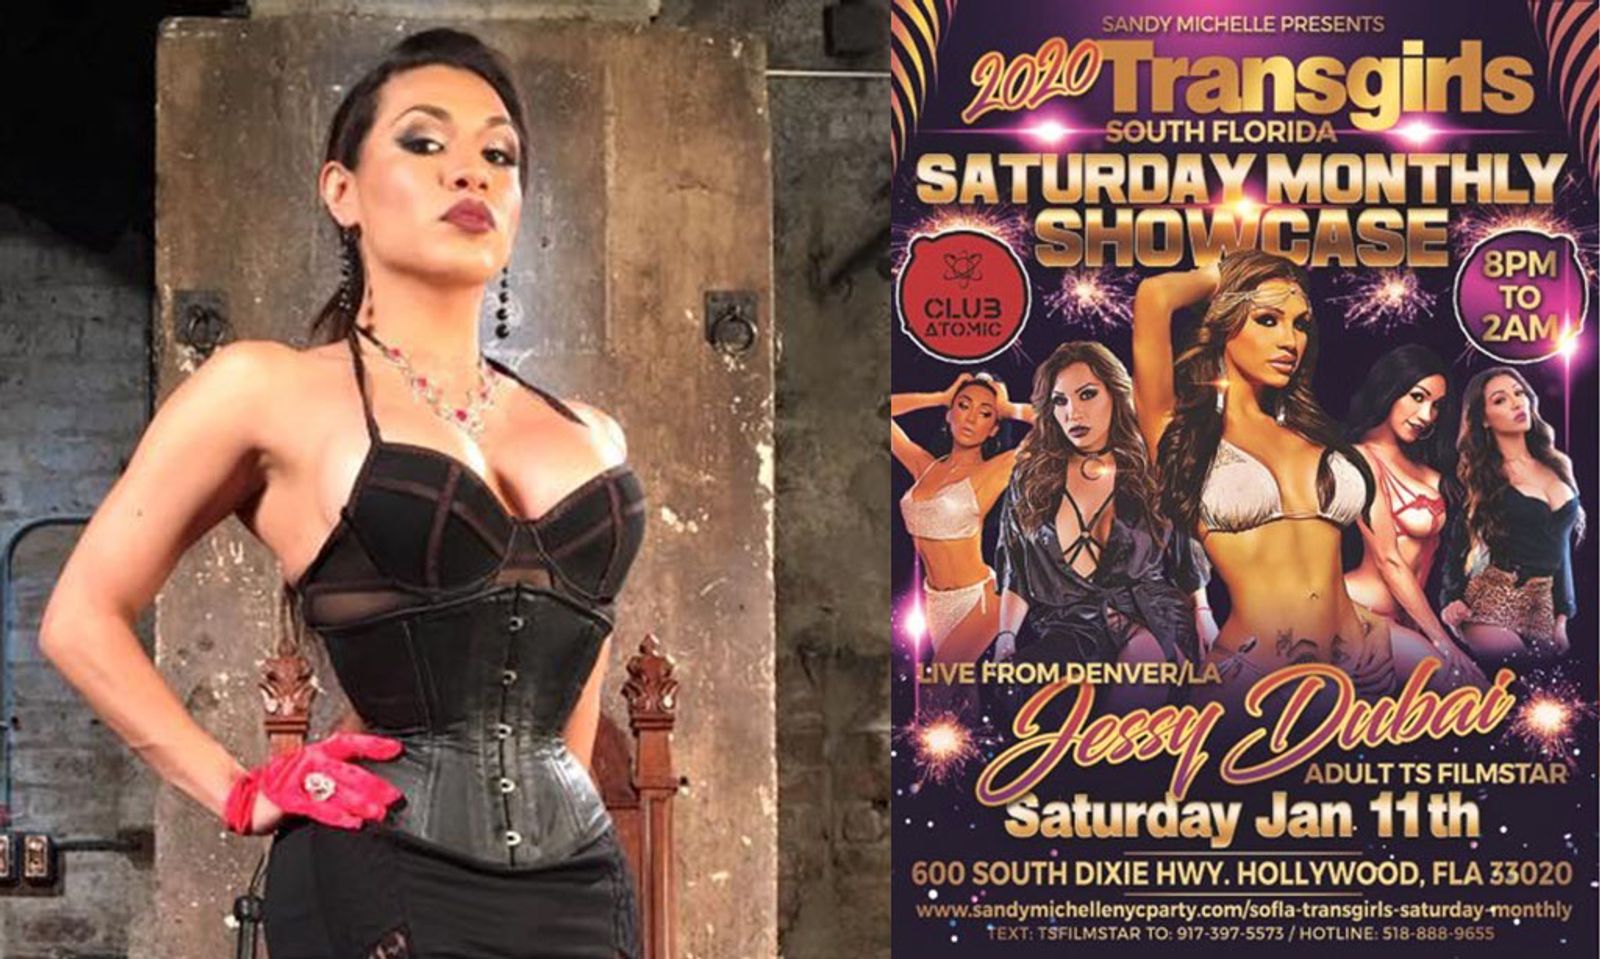 Jessy Dubai to Feature at Club Atomic in Hollywood, FL Saturday